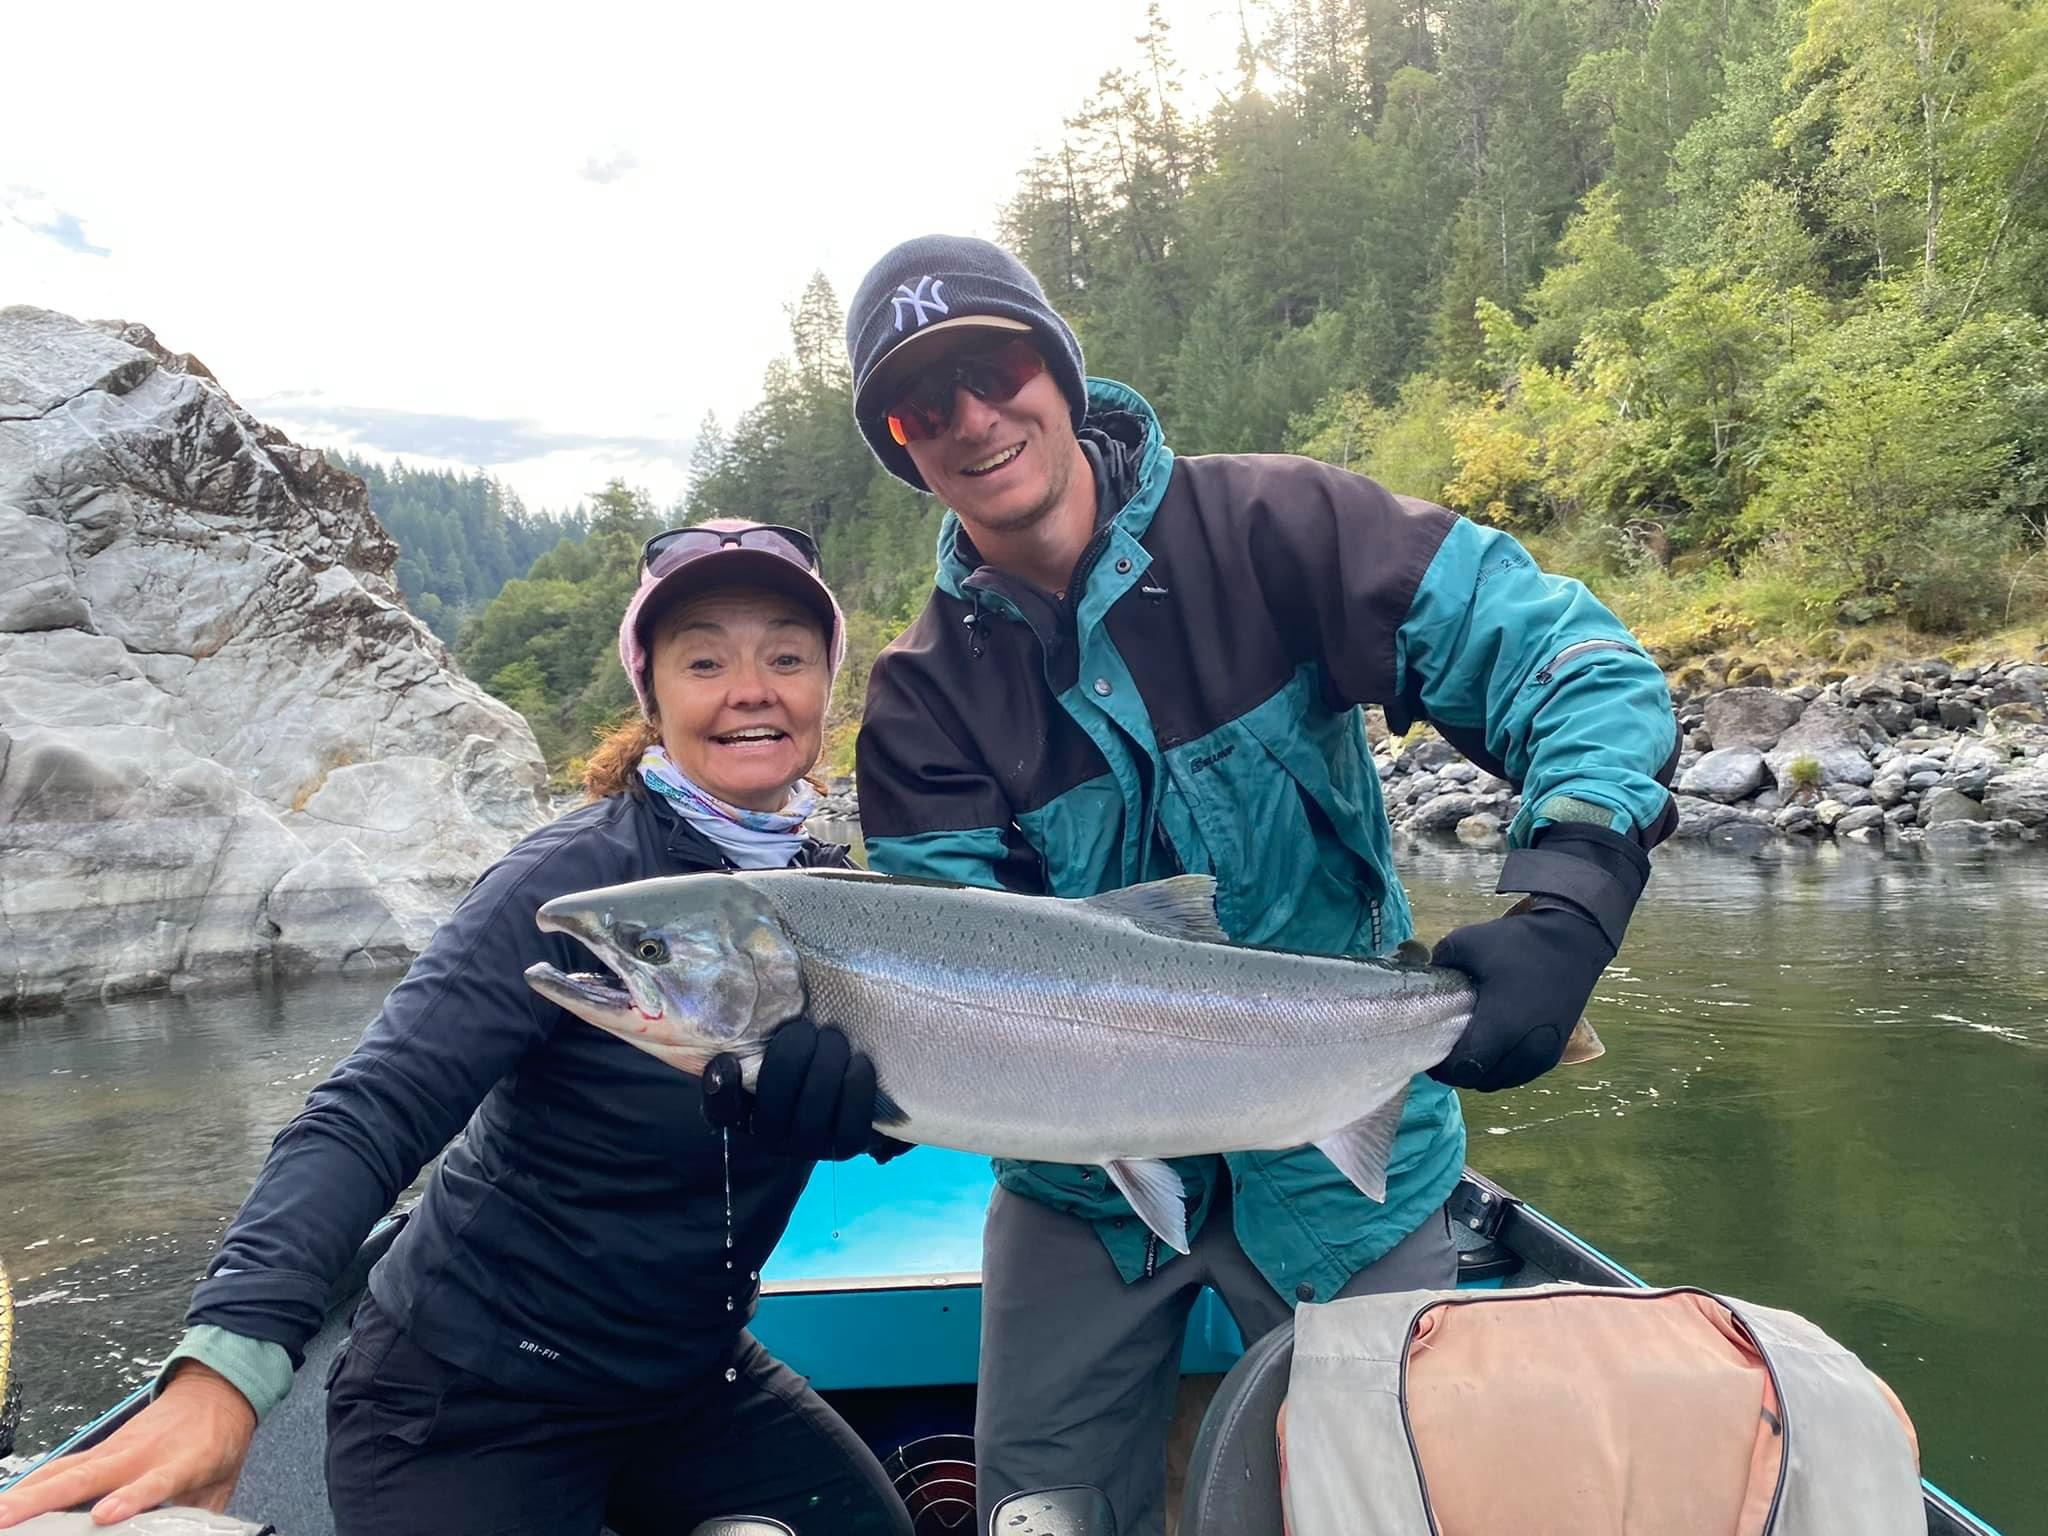 Rogue River Rafting and Fishing trips